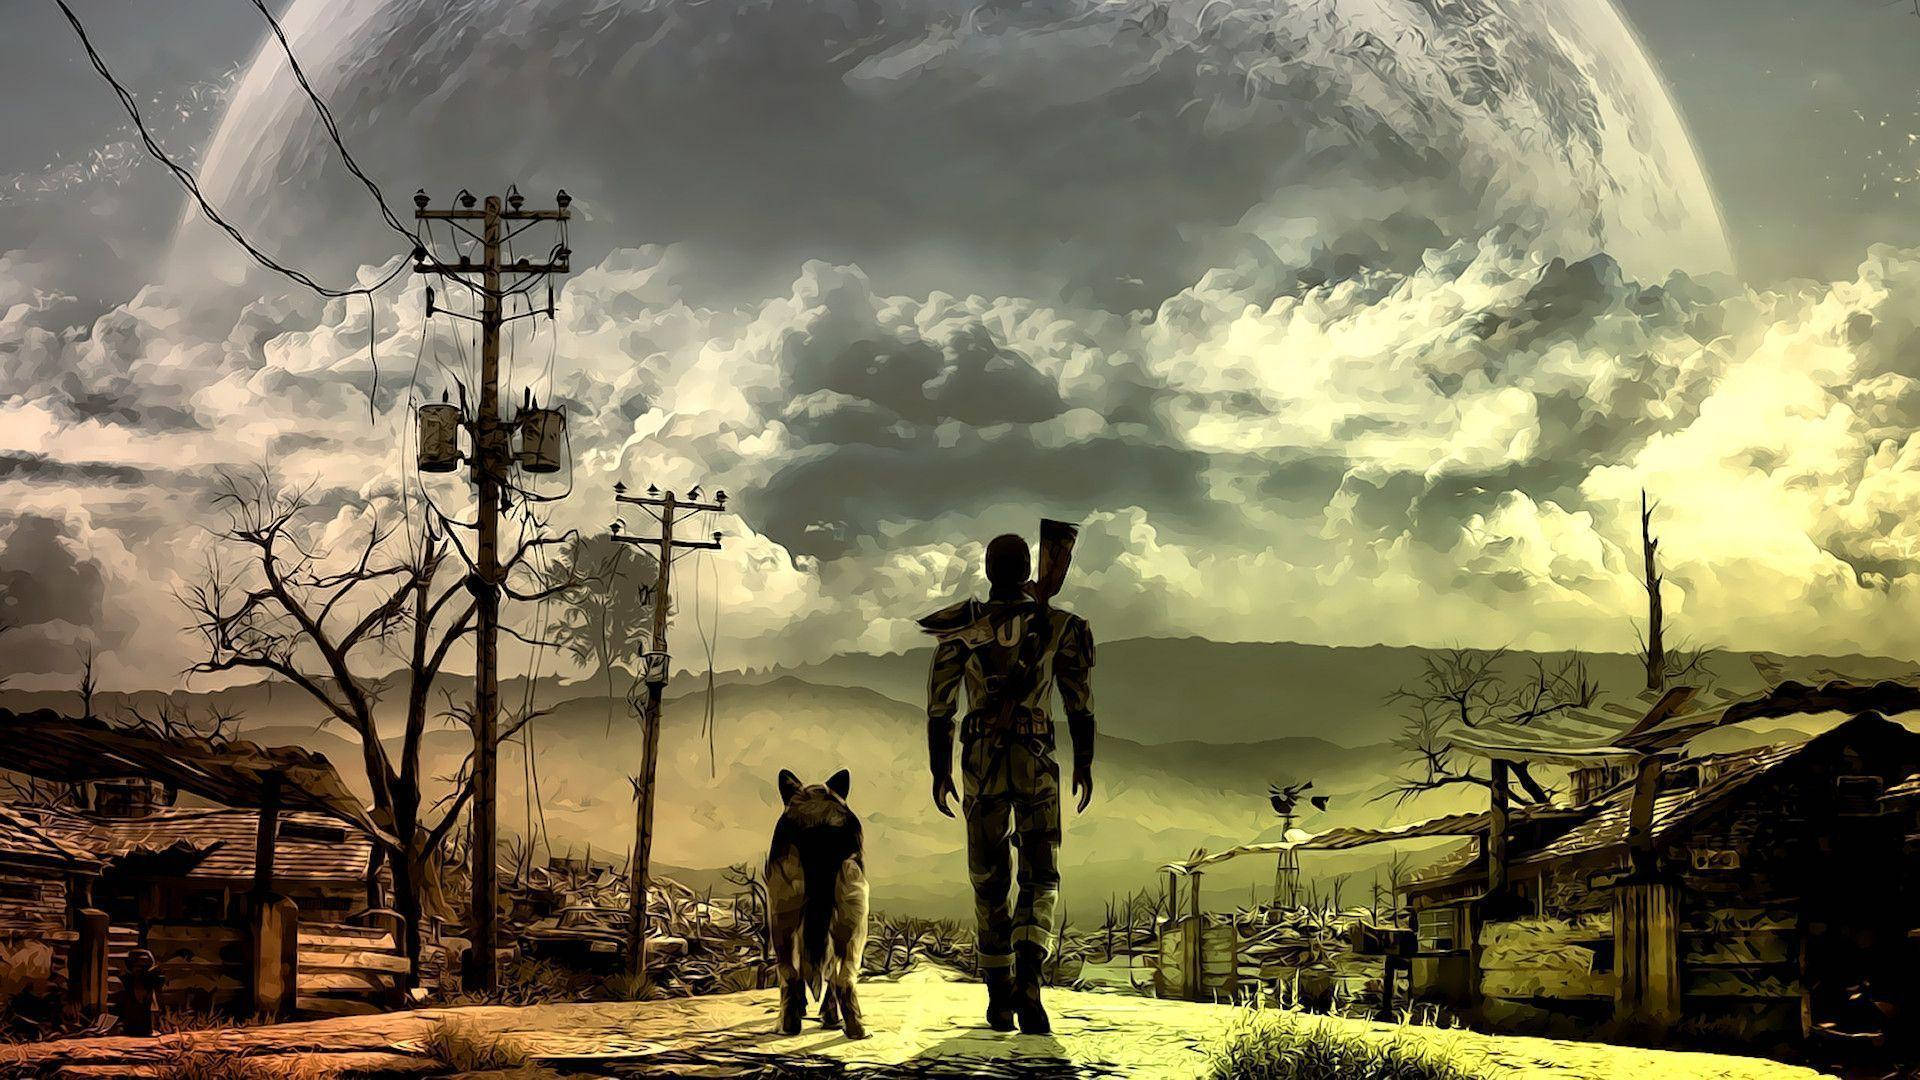 "The Wasteland of Fallout" Wallpaper